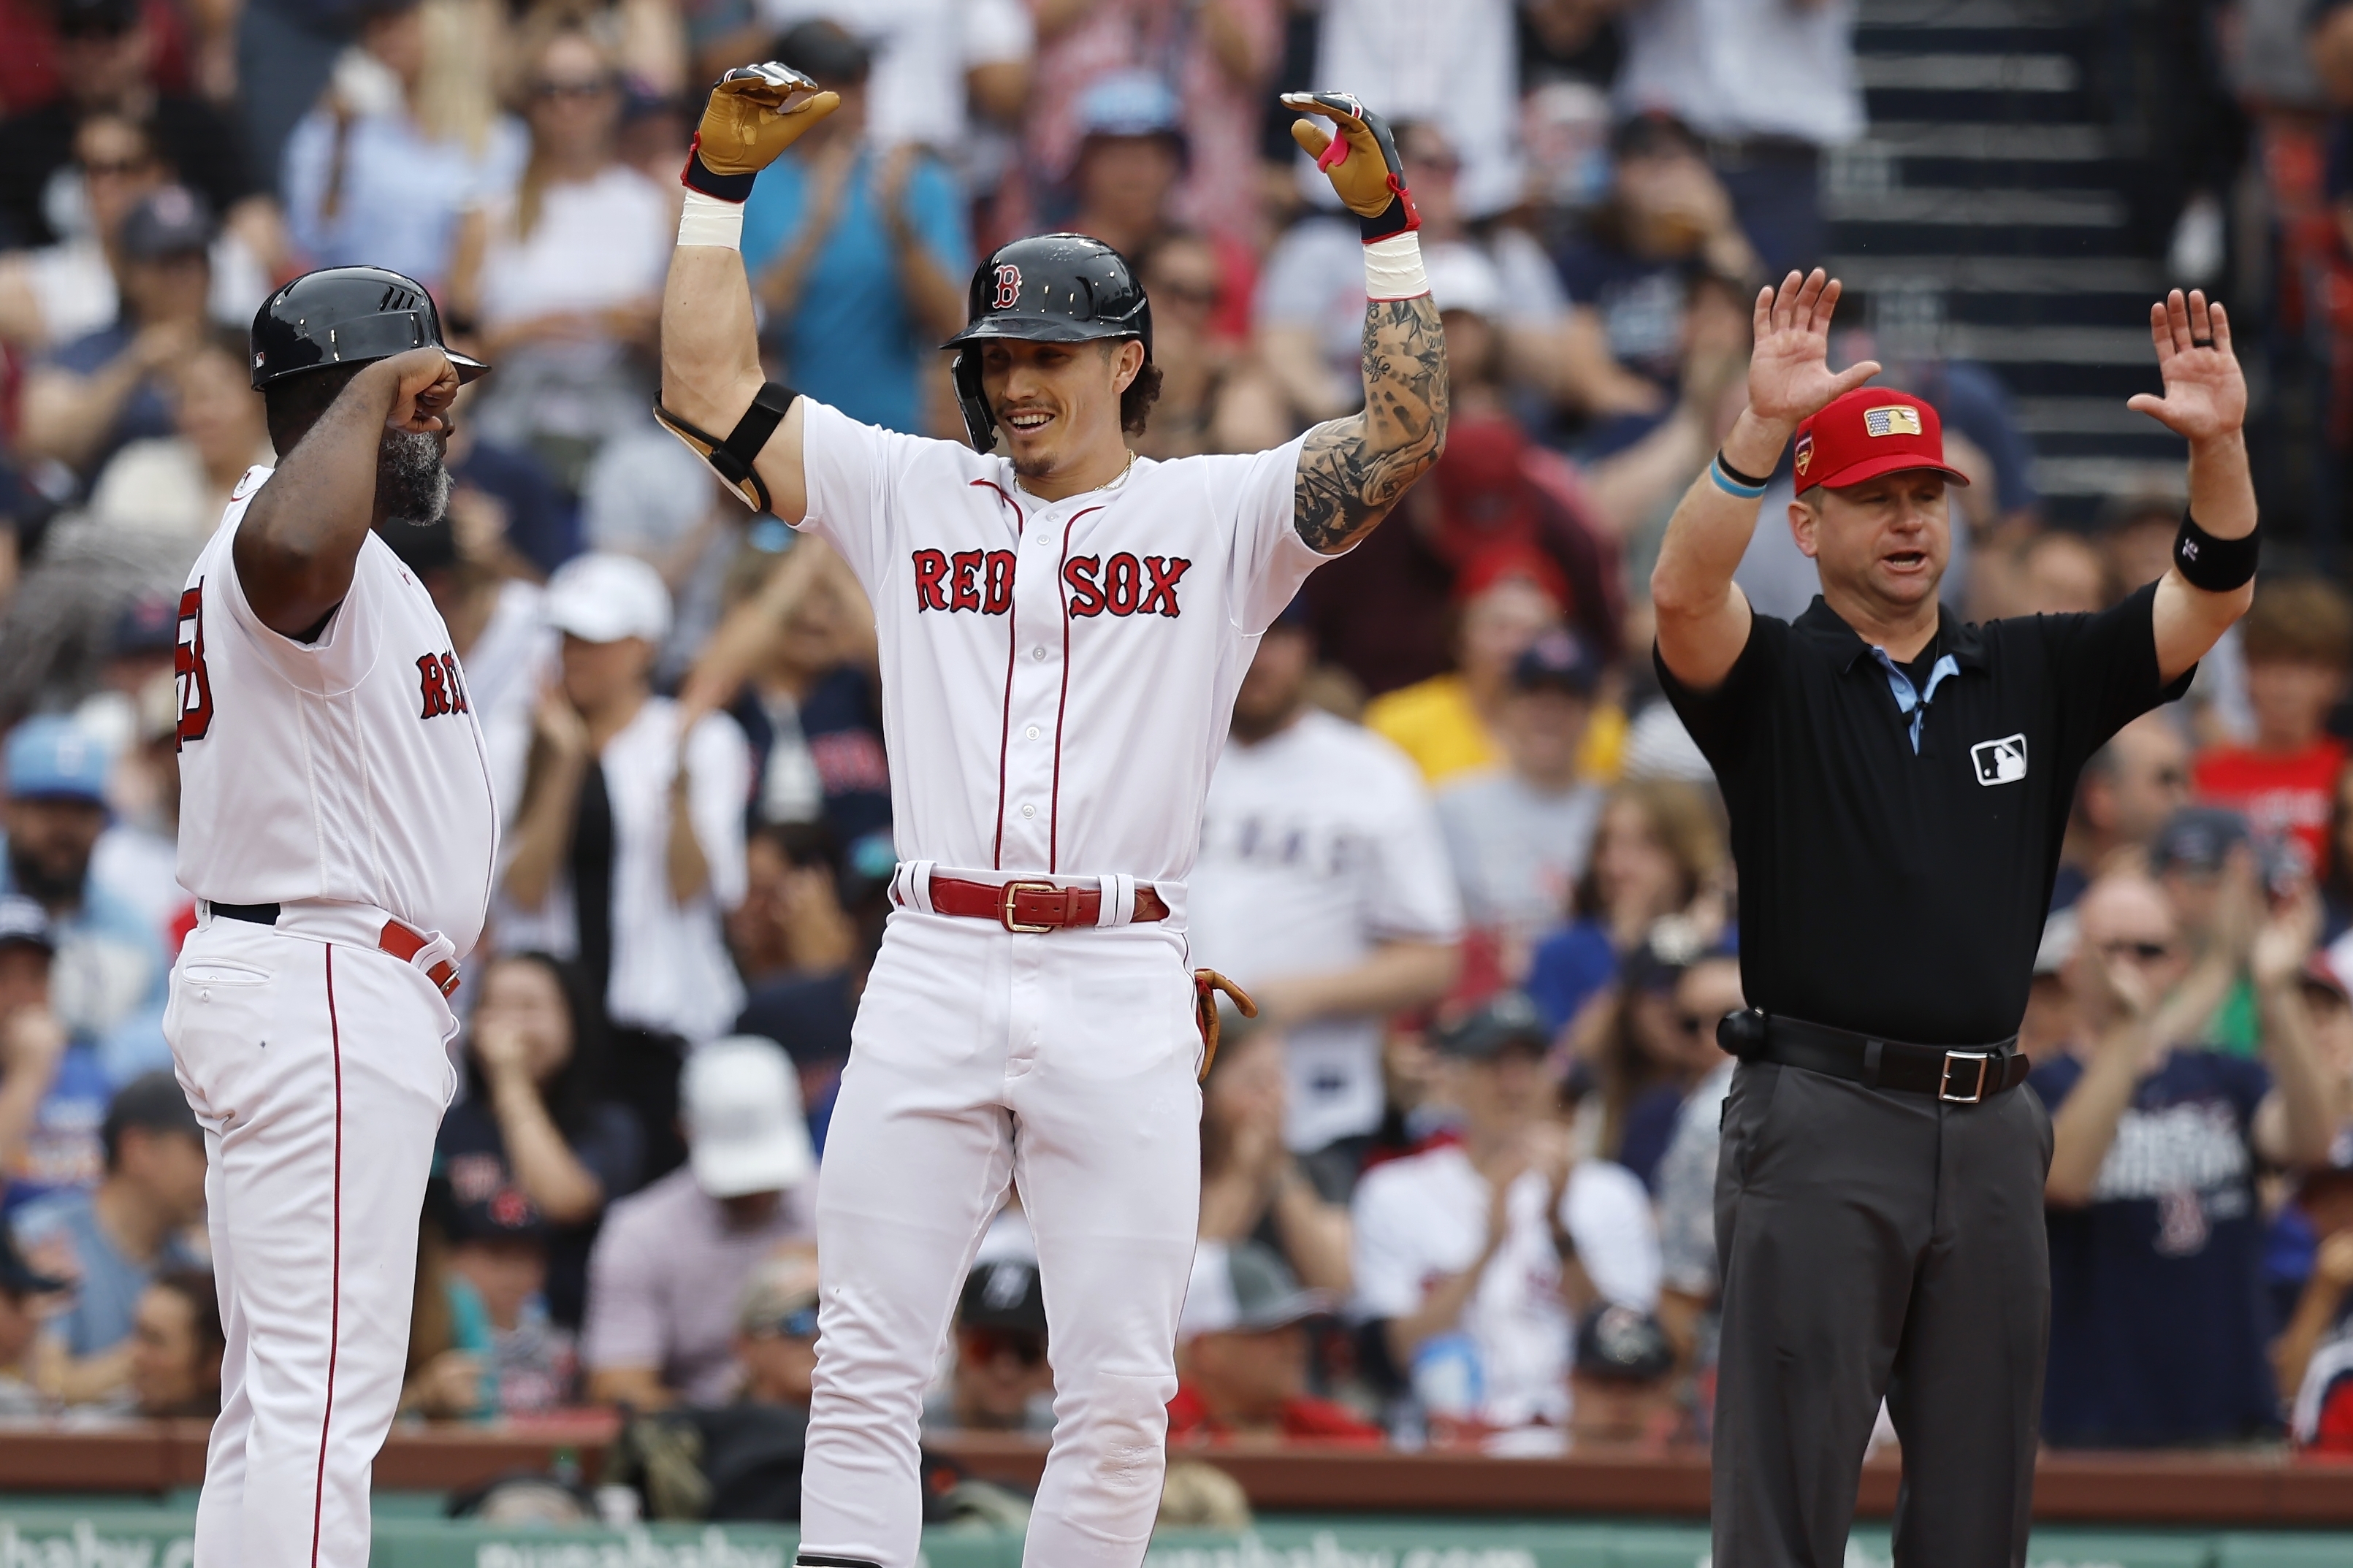 Here's what the Red Sox are expected to do at the trade deadline